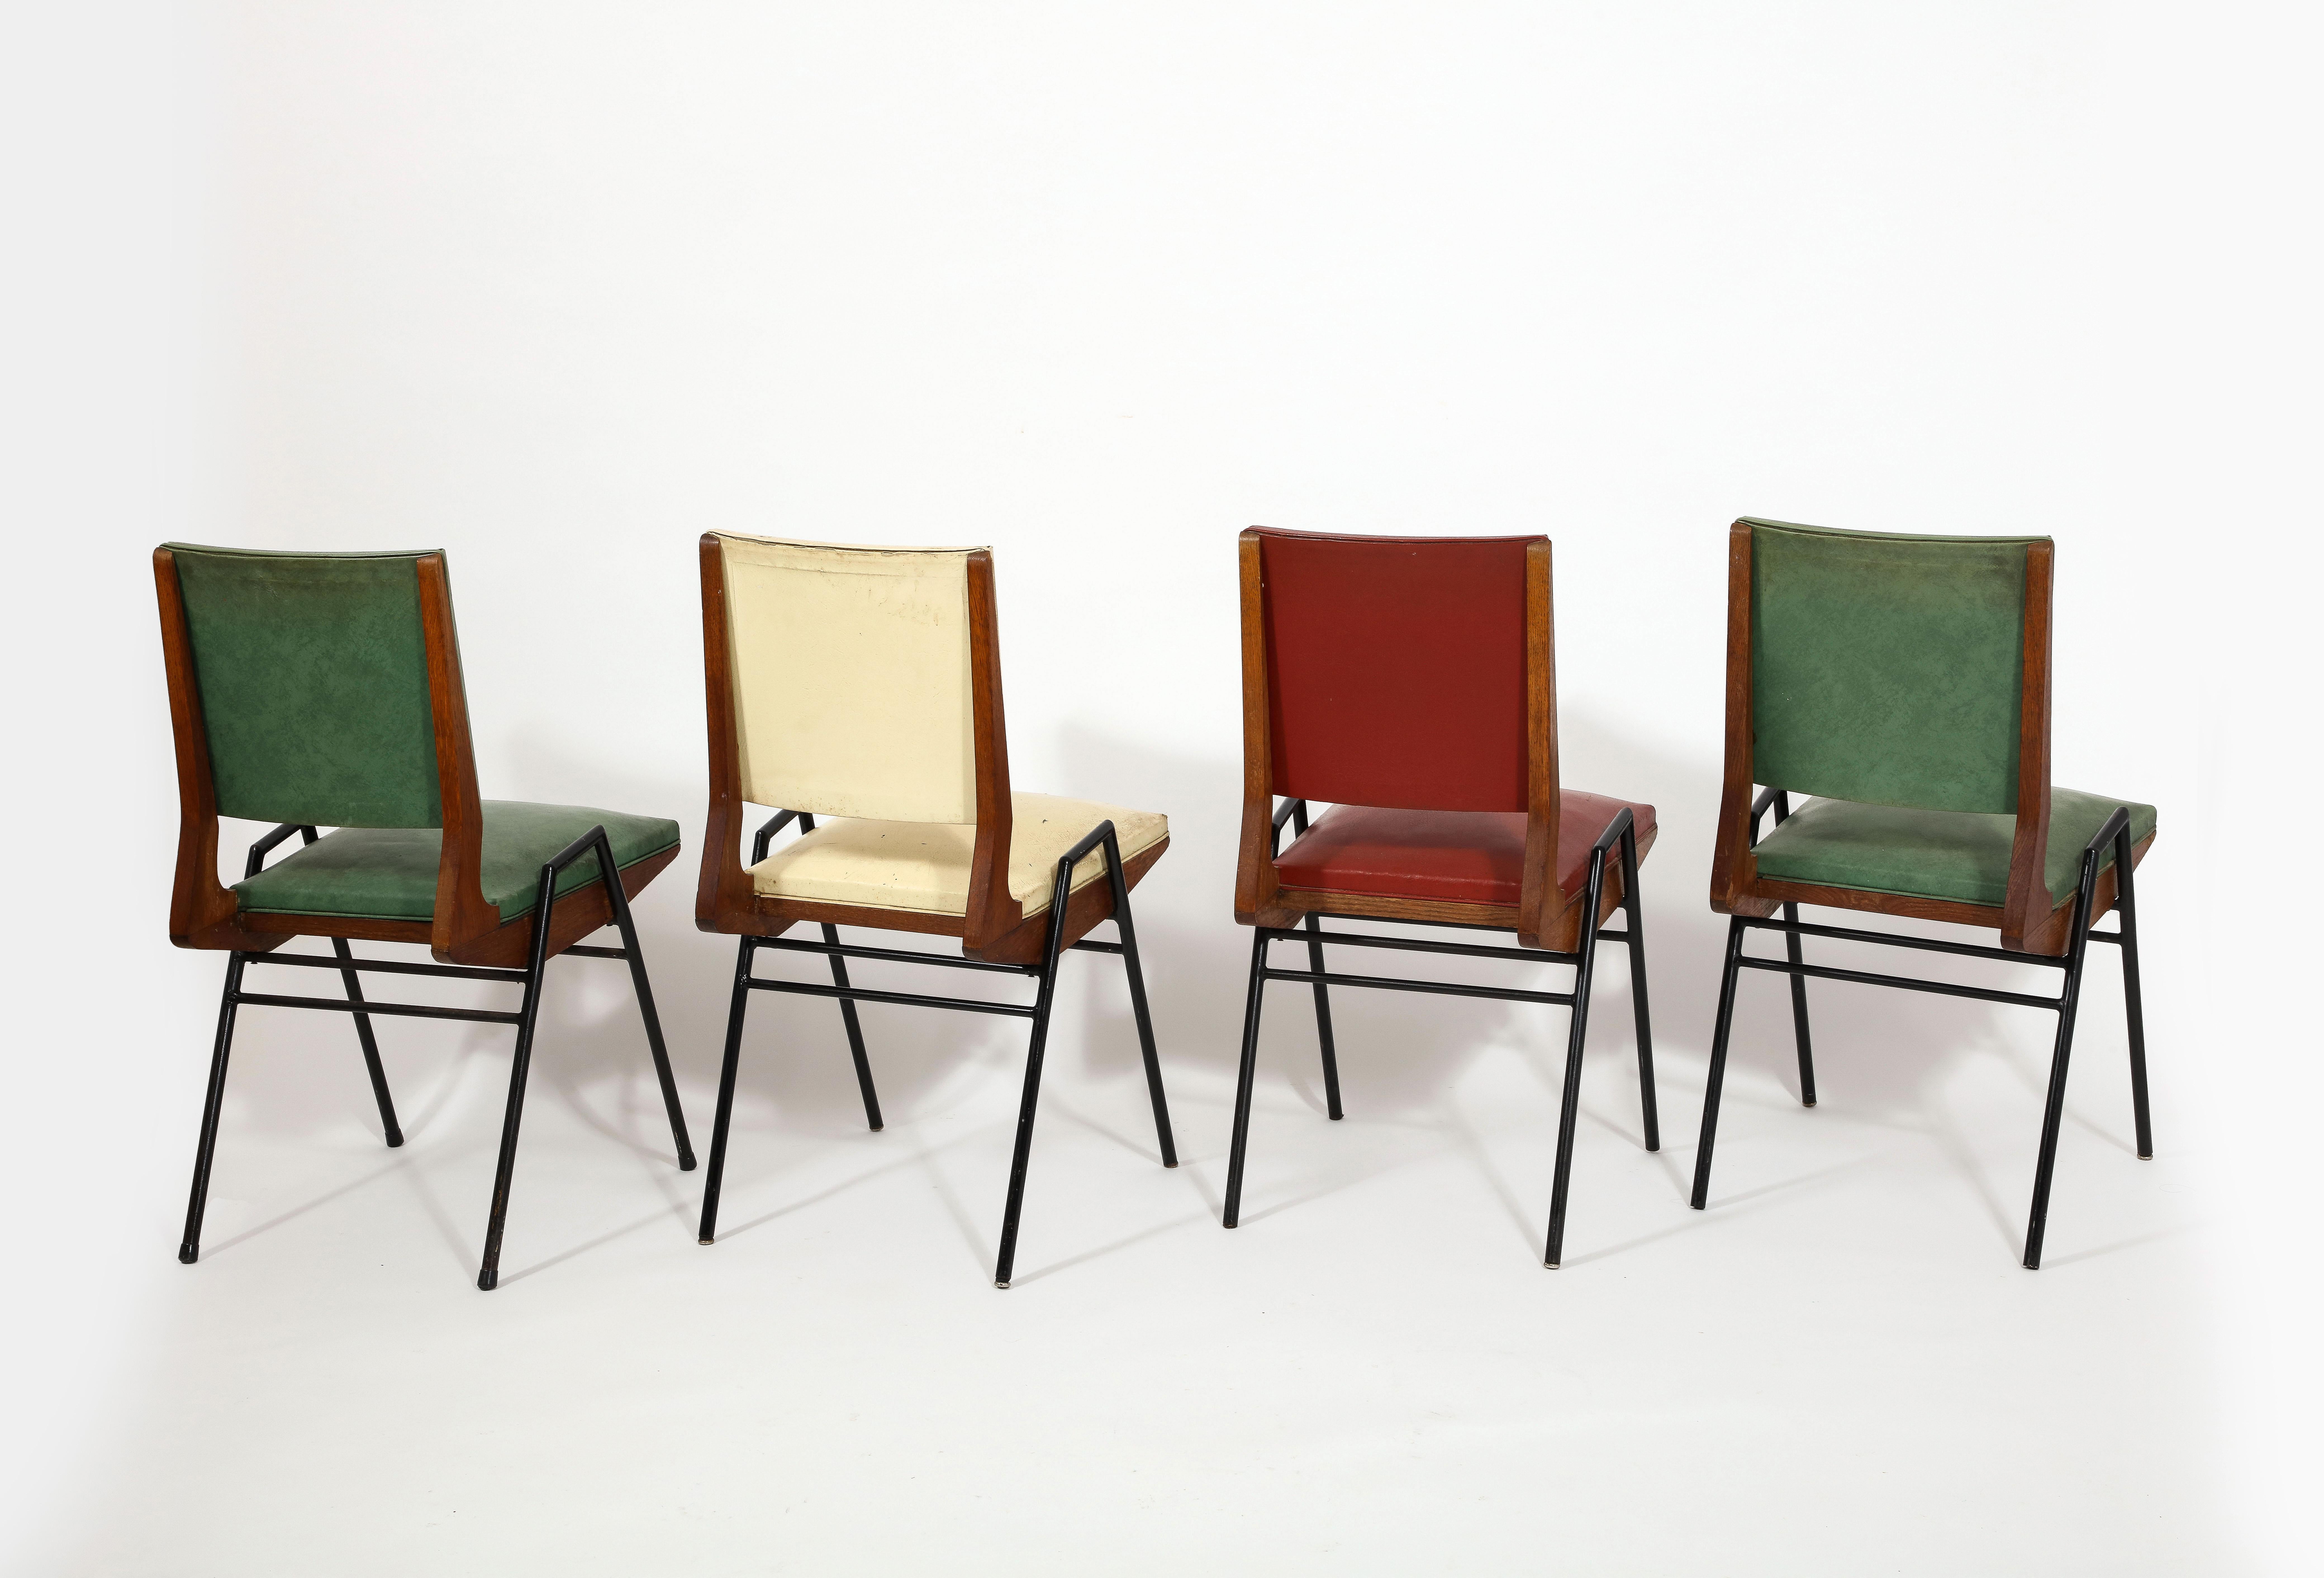 Steel Set of Twelve Dining Chairs by Maurice Pré, France 1950's For Sale